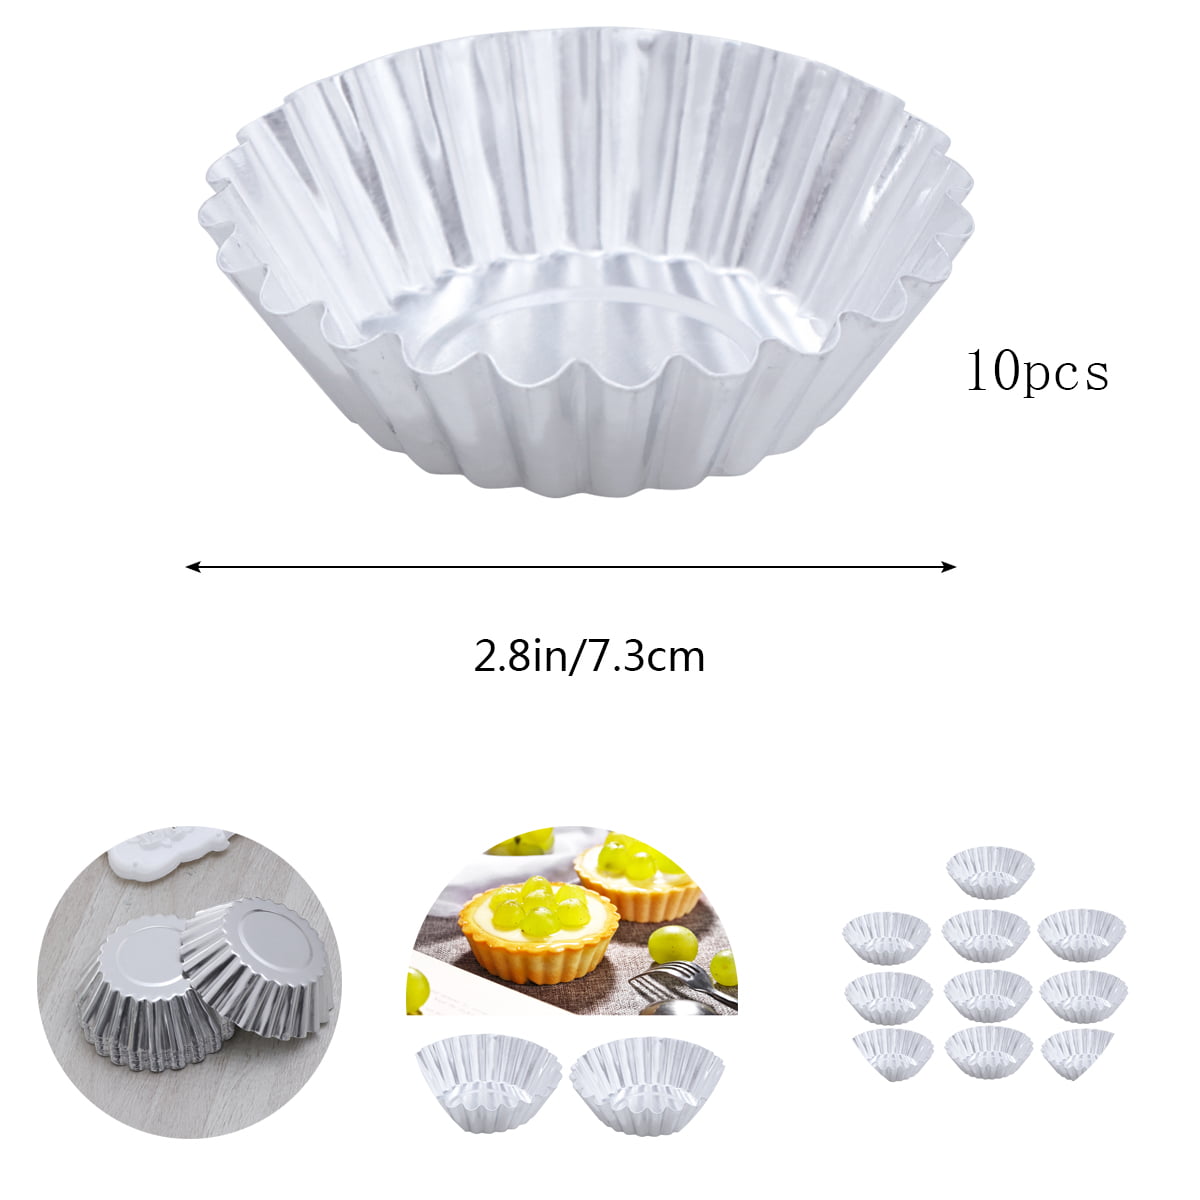 Saturn Space Shape Silicone Cake Mold Making Cupcakes Muffins Cookies Bakeware 